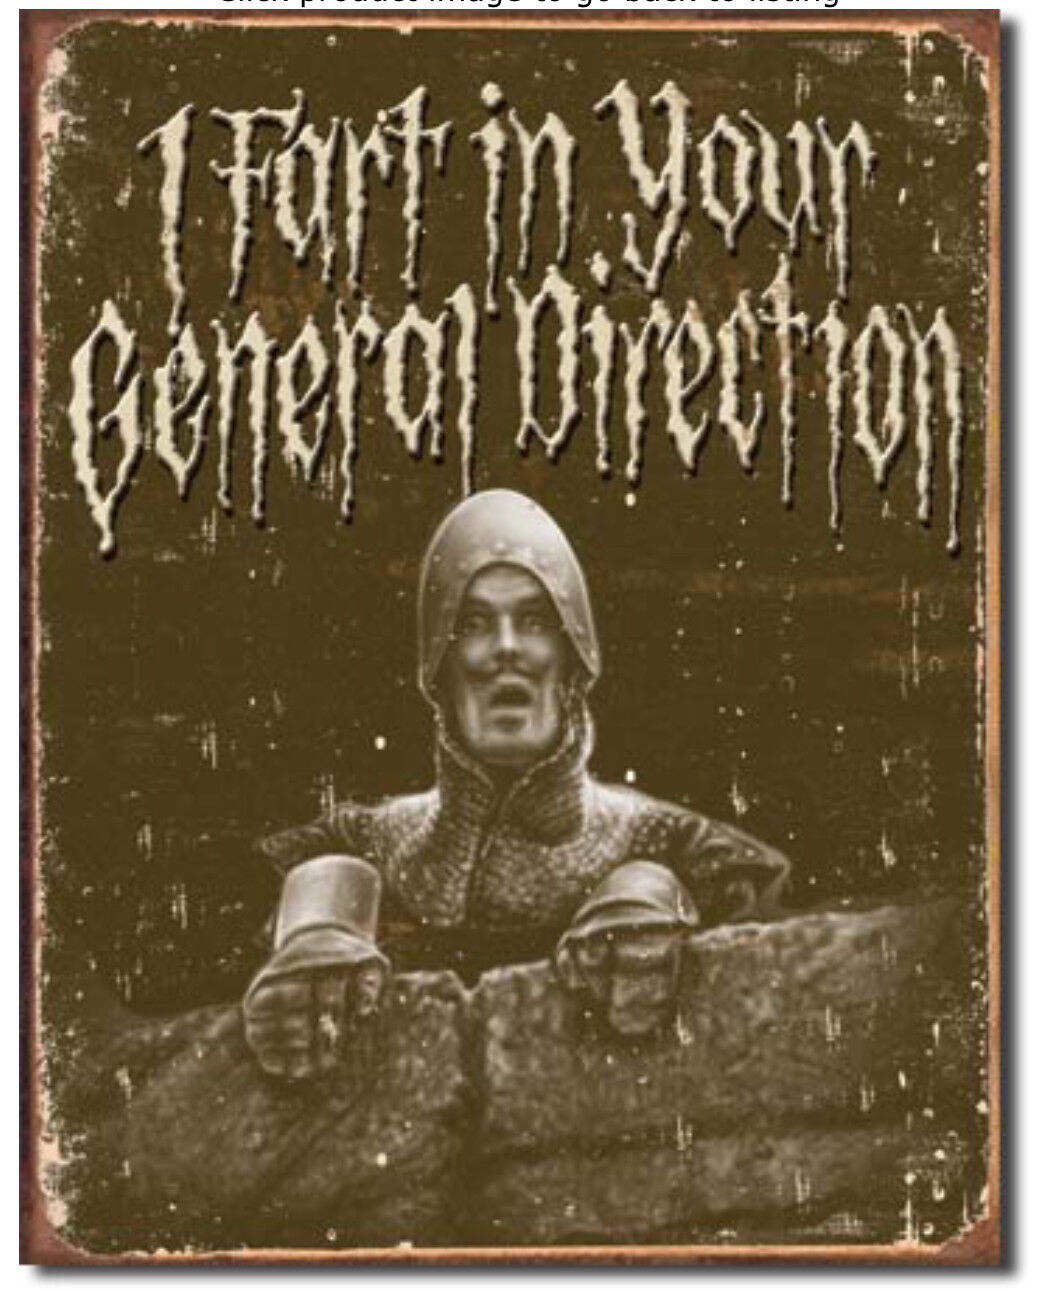 Monty python holy grail Metal tin sign I fart in your general direction #1407